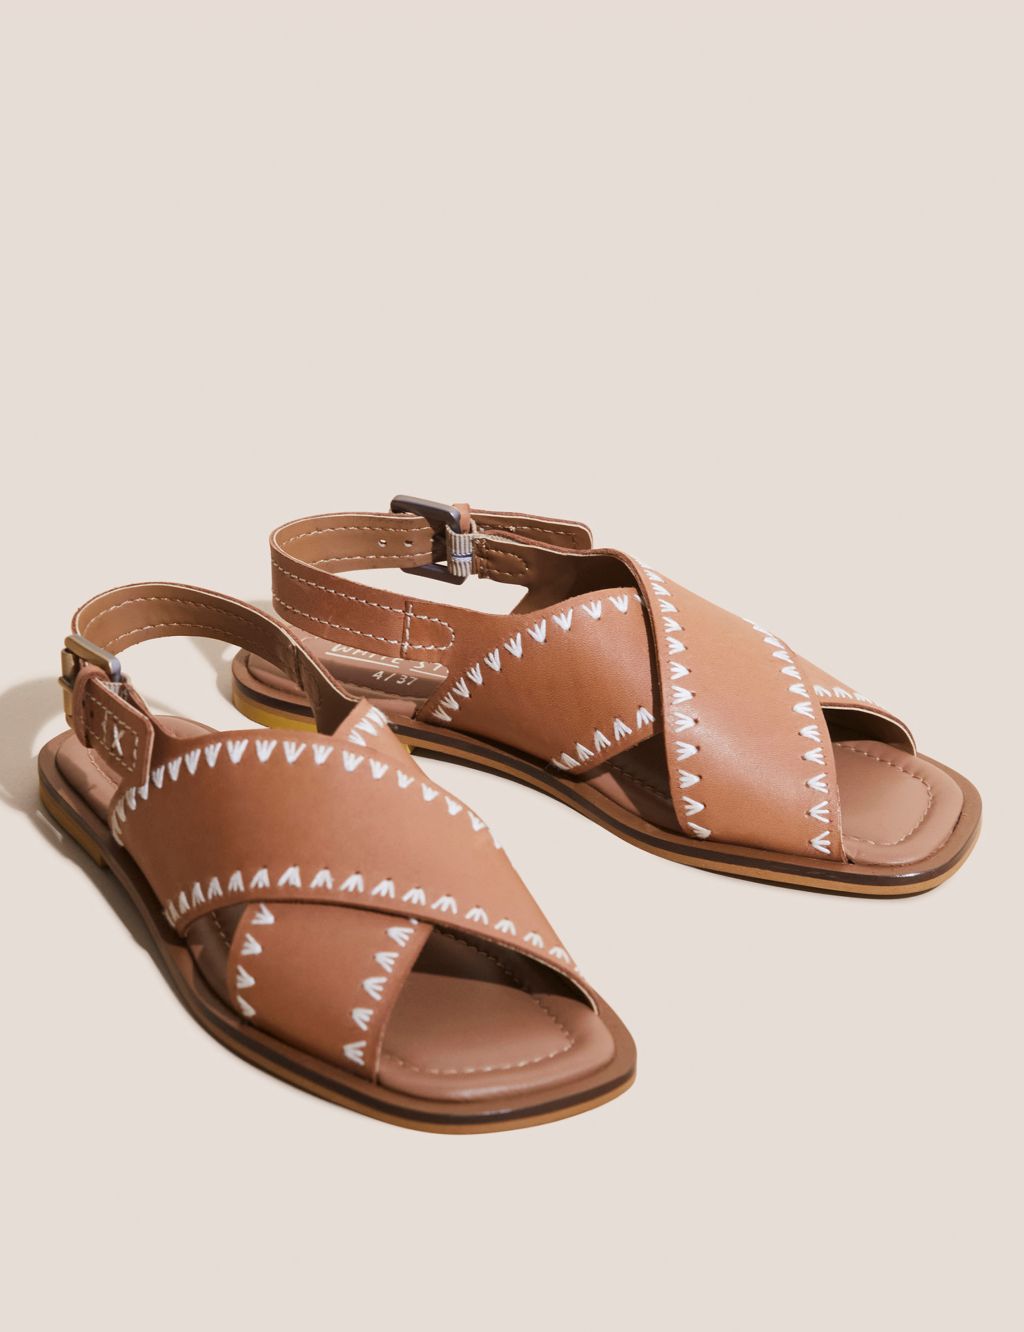 Leather Crossover Buckle Flat Sandals image 2